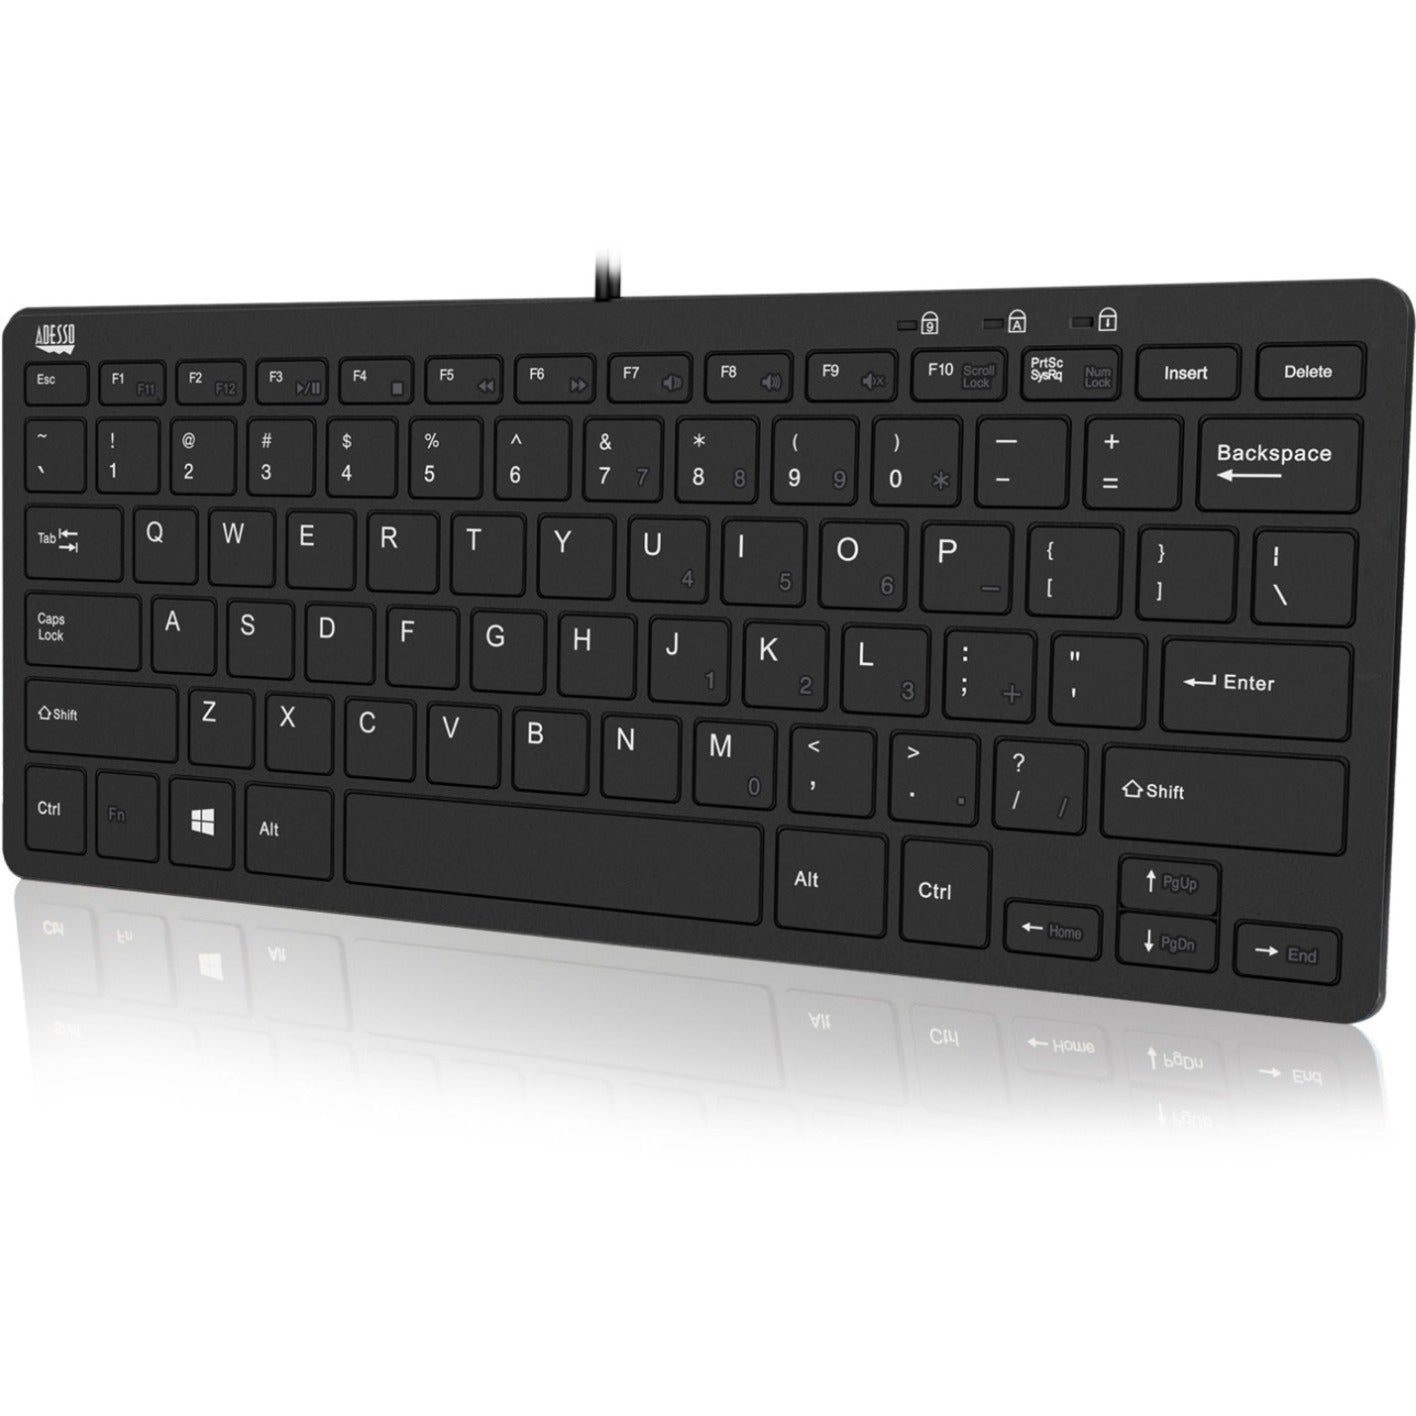 Adesso AKB-510HB SlimTouch Mini Keyboard with USB Hubs, Quiet Keys, Compact and Slim Design